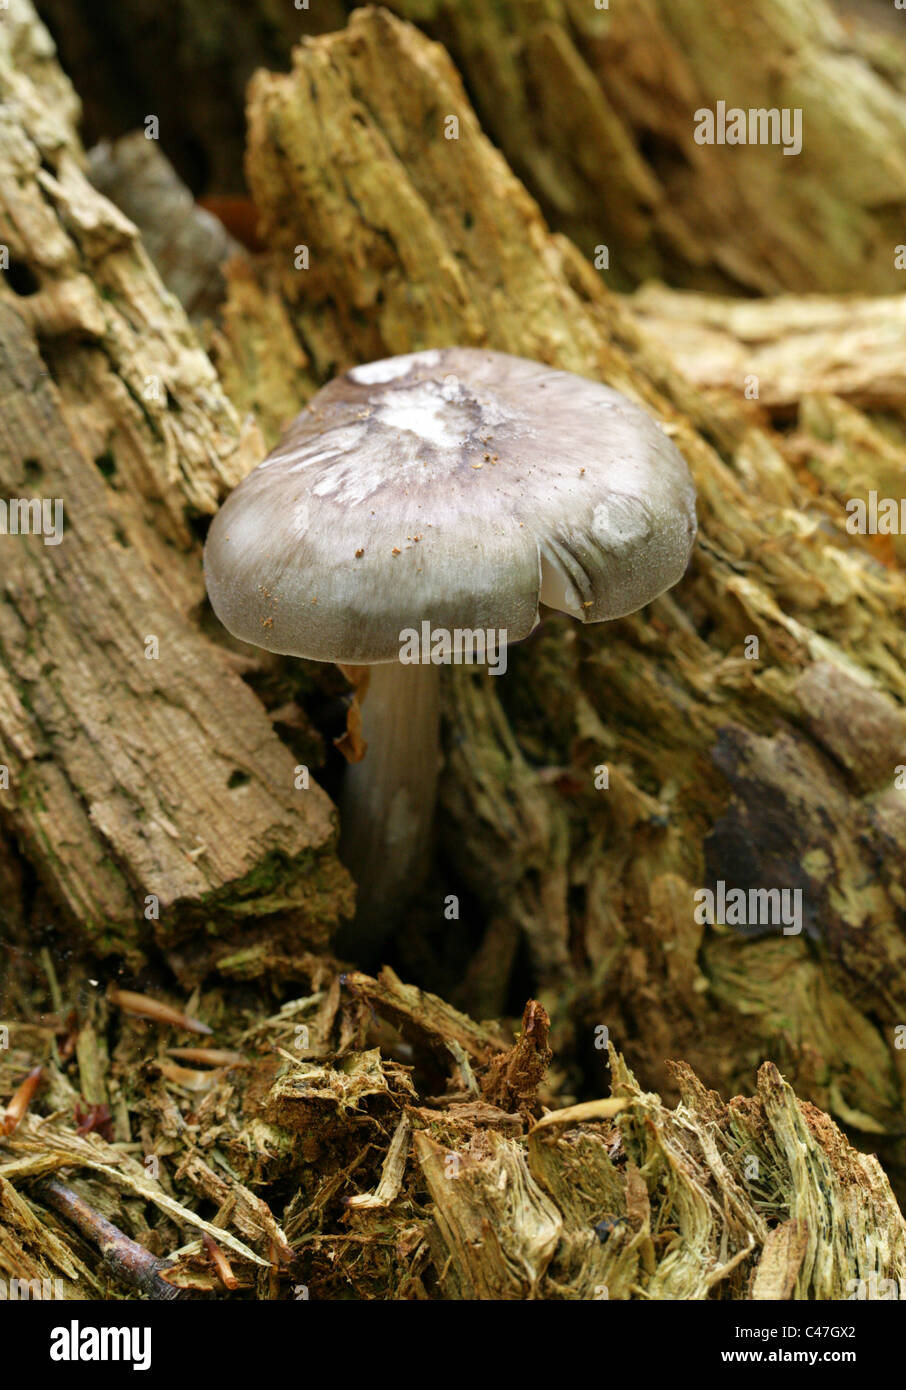 Willow Shield Fungus, Pluteus salicinus, Pluteaceae. Growing out of an old decaying beech tree stump, Spring. Stock Photo